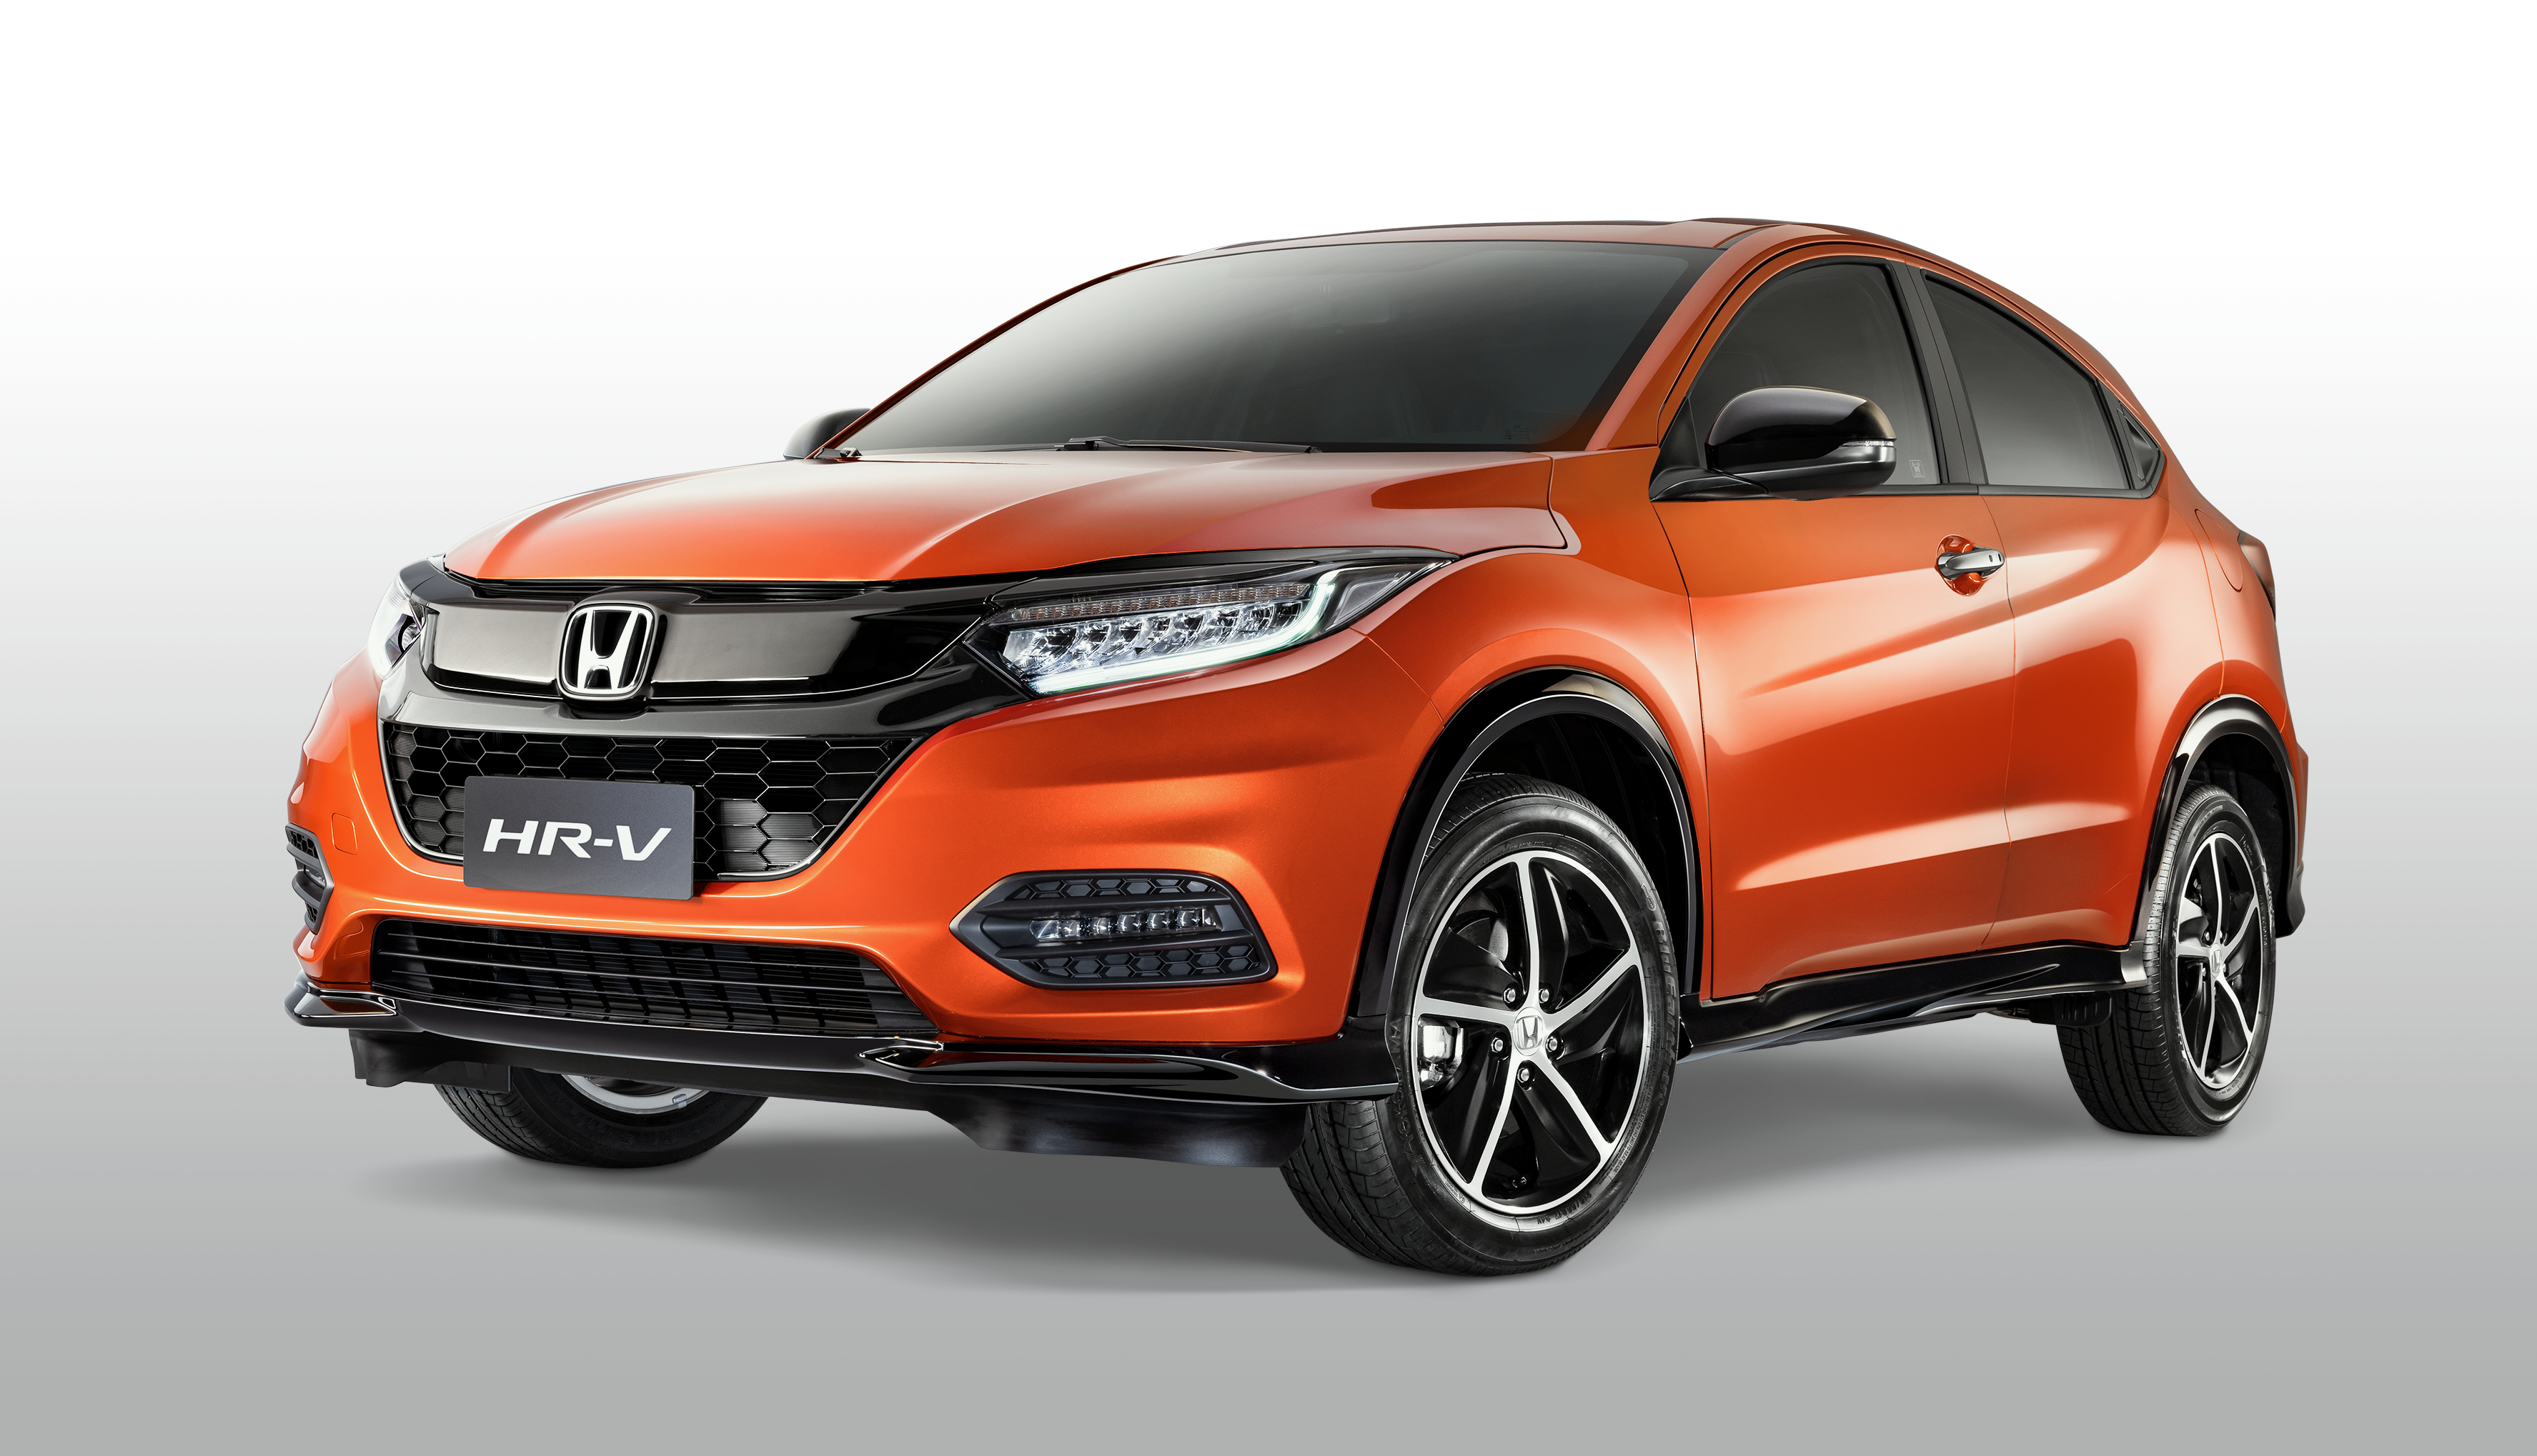 New 2018 Honda HRV RS Variant Availability, Colors and